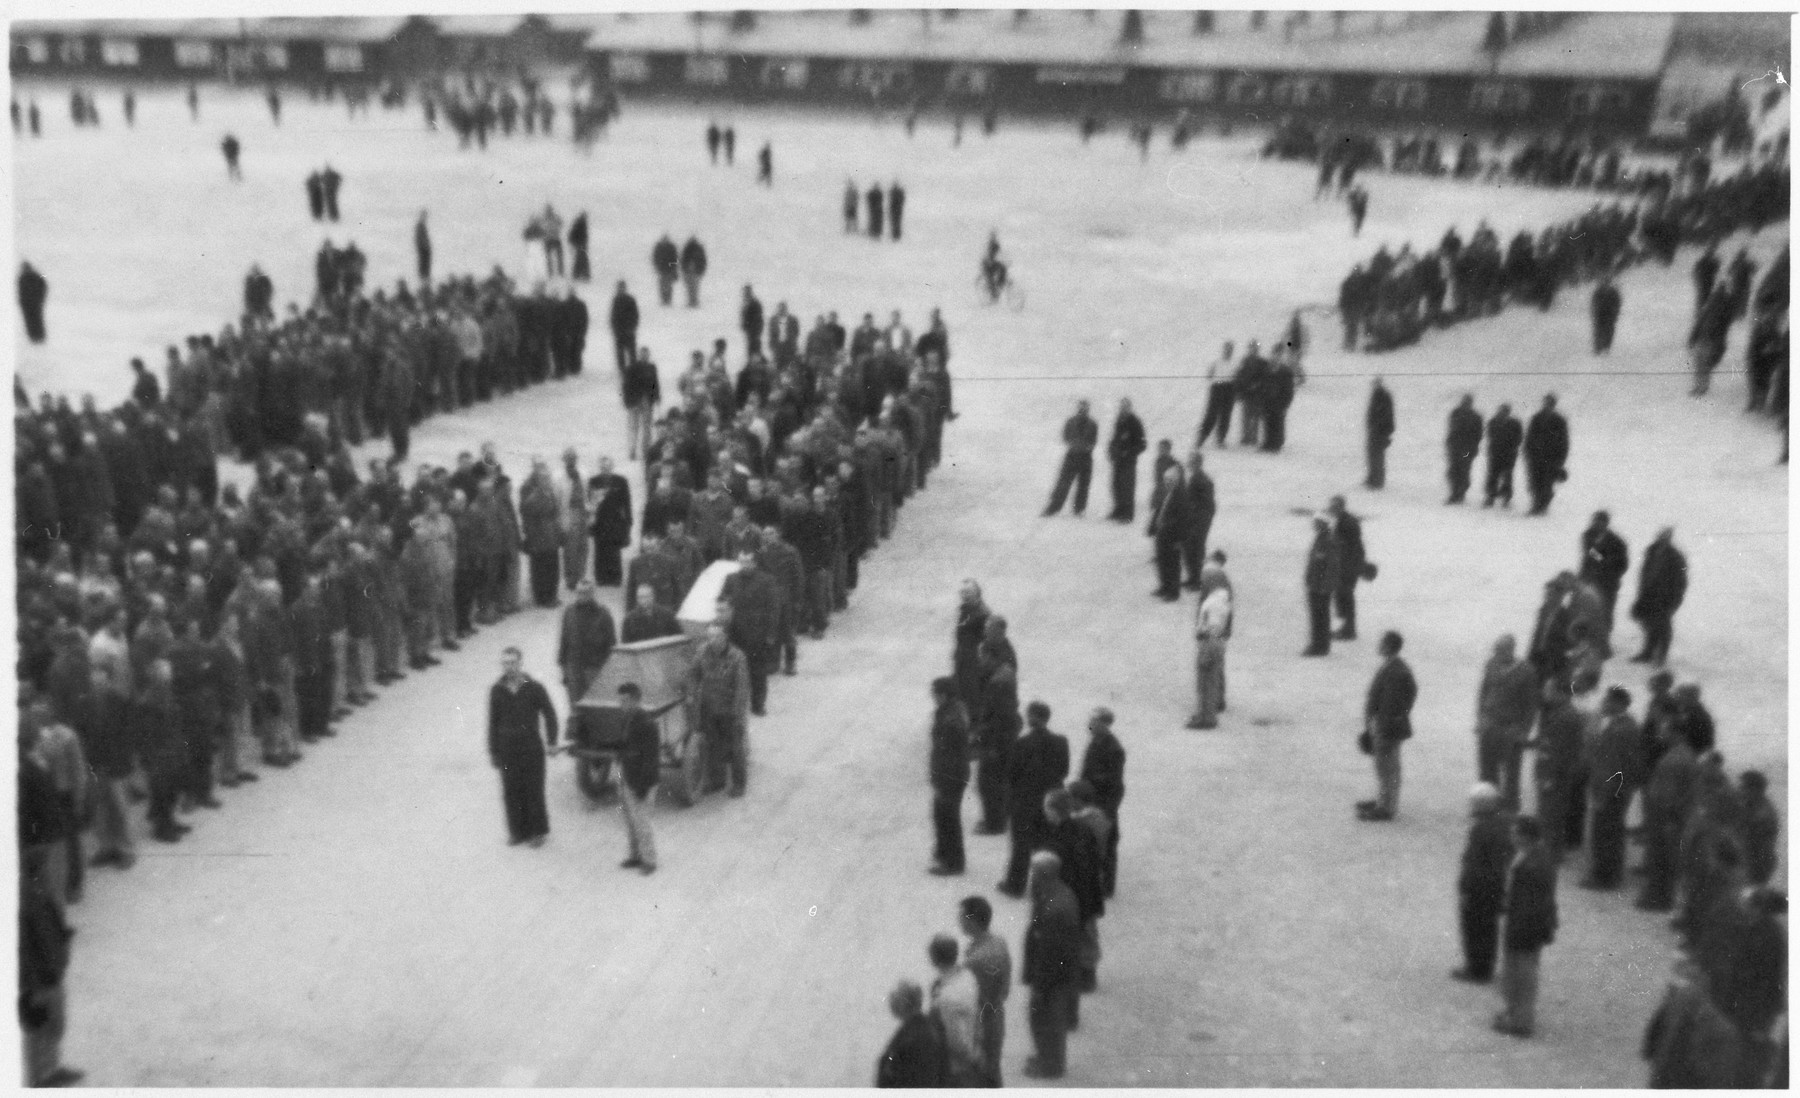 Survivors gather in Buchenwald's main courtyard for the first burial procession at the camp.

Orignial caption reads: "The first burial procession held at Buchenwald's main courtyard."